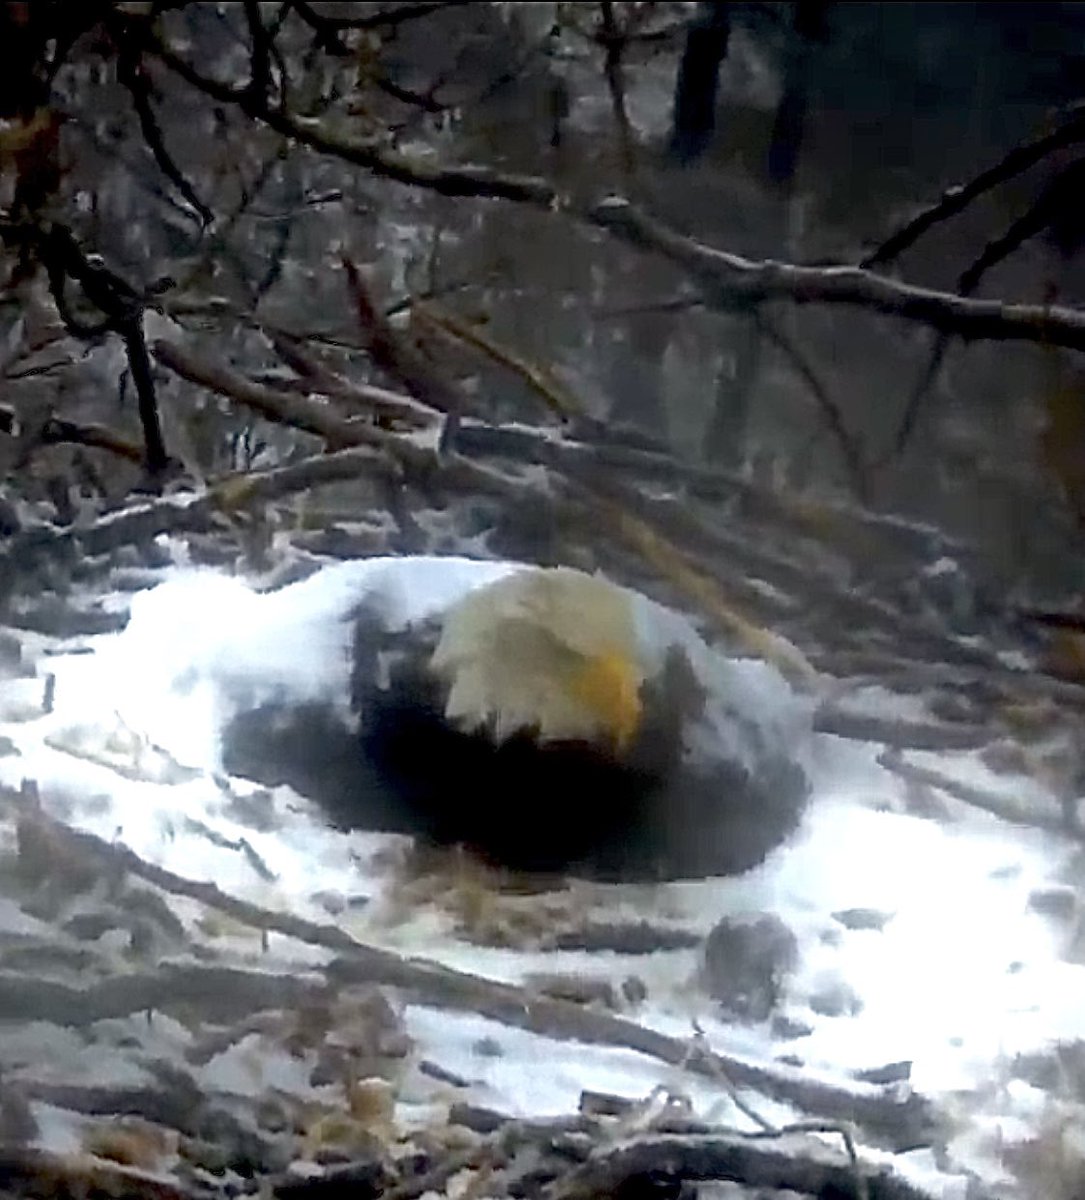 The Winter-Like Weather Here In Minnesota Is Making For A Cold, Snowy Nest This Morning... https://t.co/66LzlMng4q